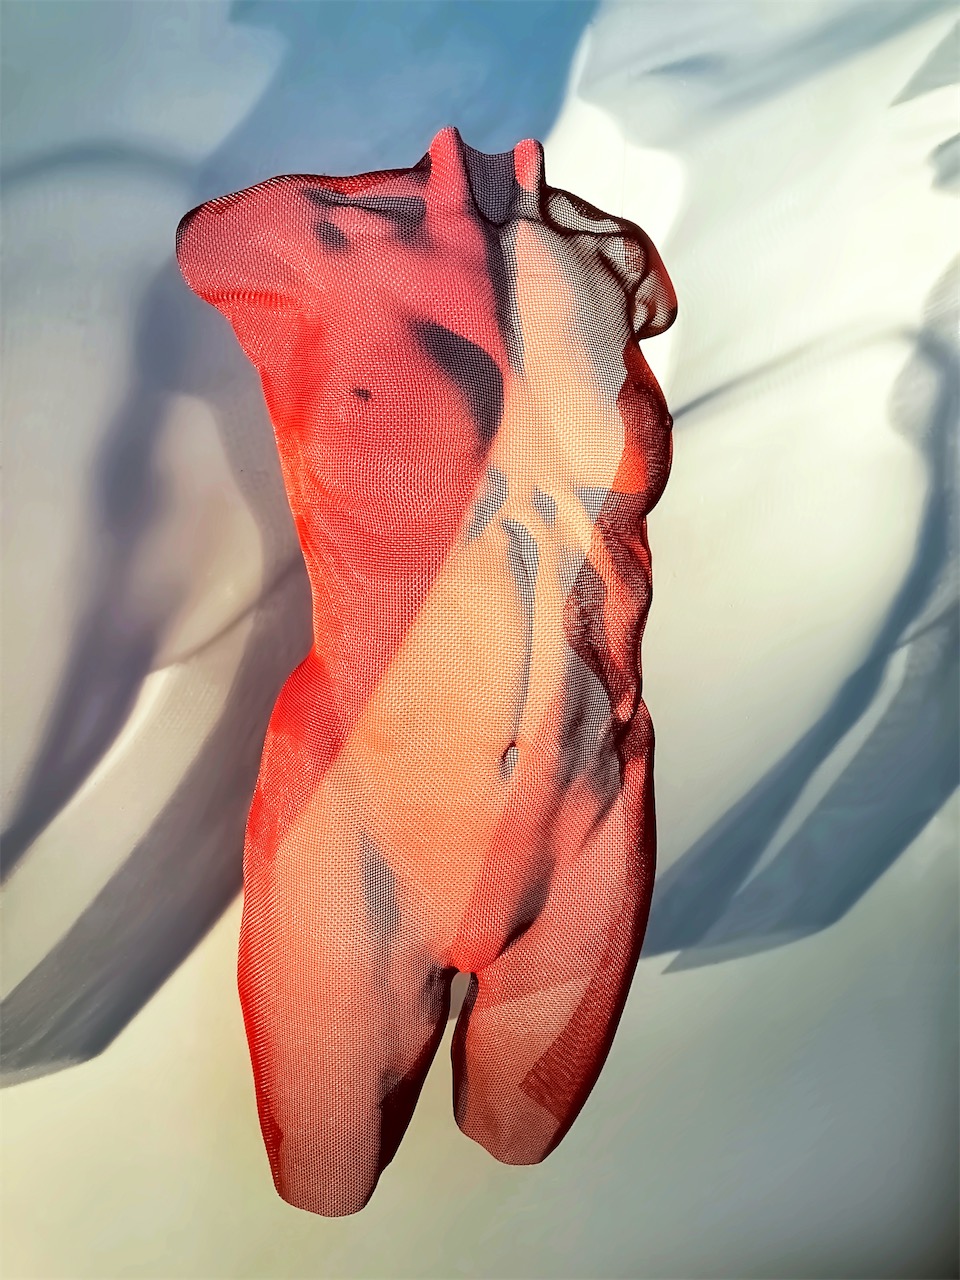 A red torso made from wired mesh